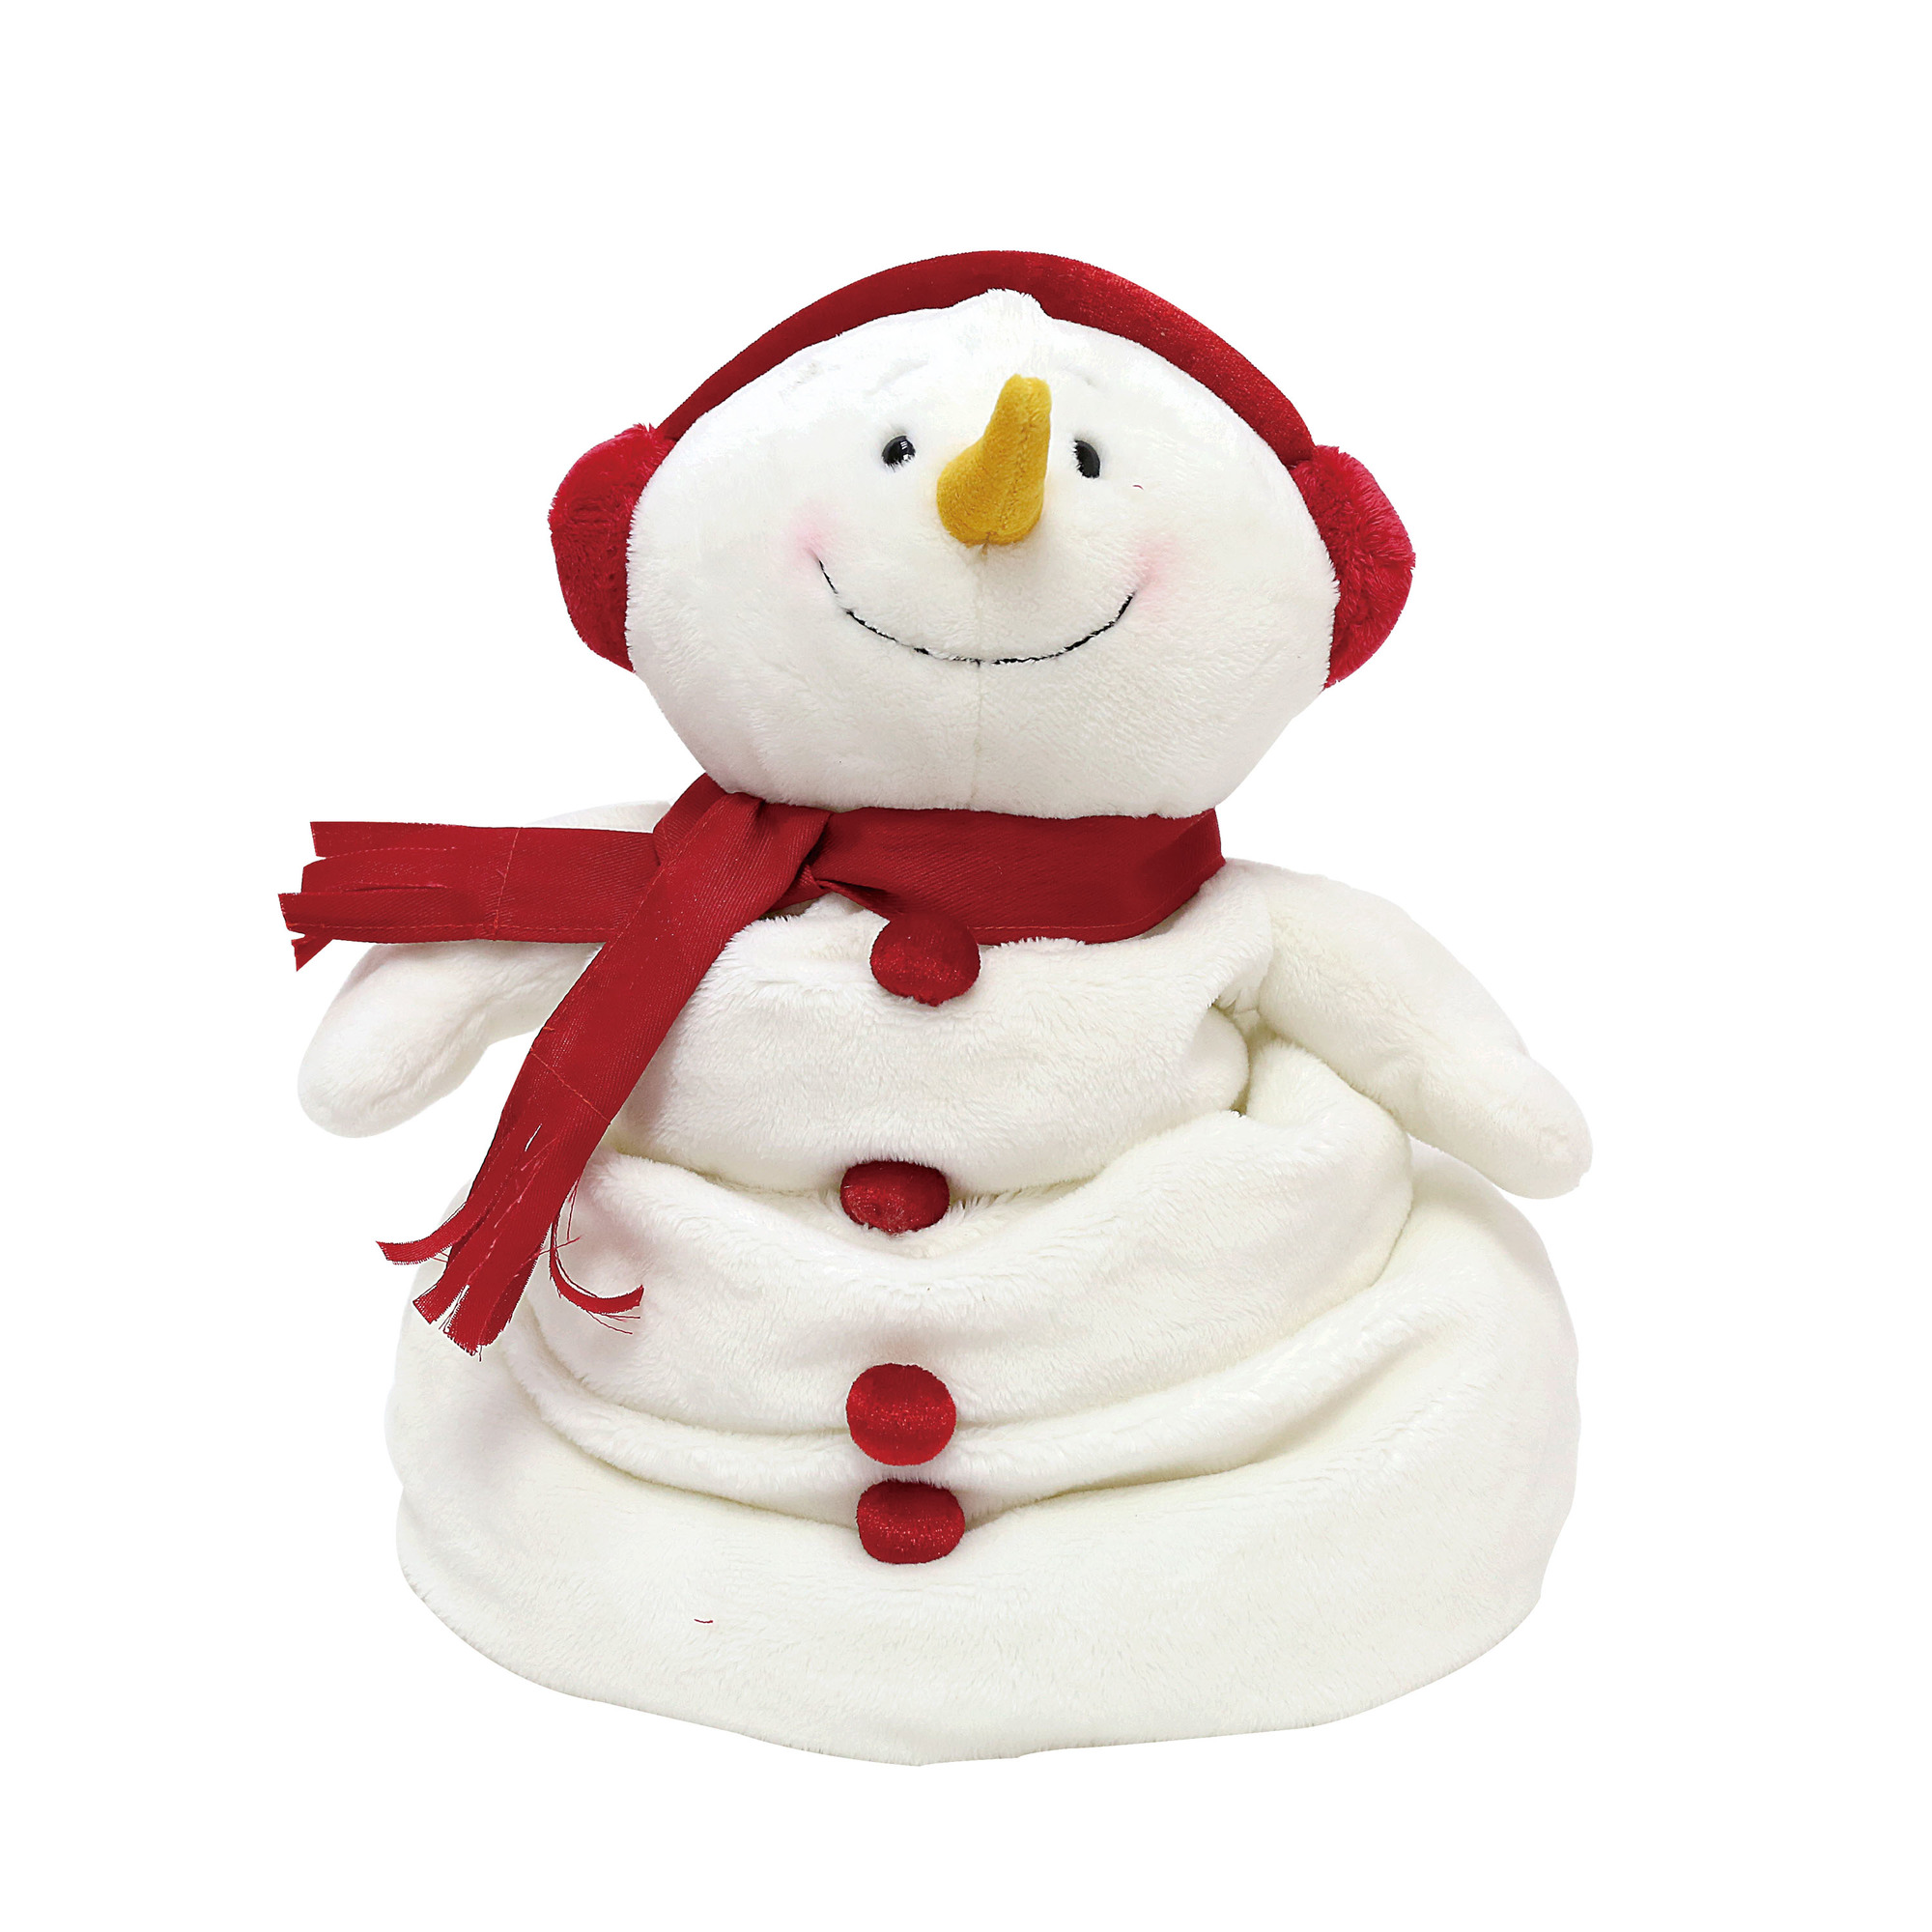 Animated Melting Snowman Plush by Dept 56 (6001175)